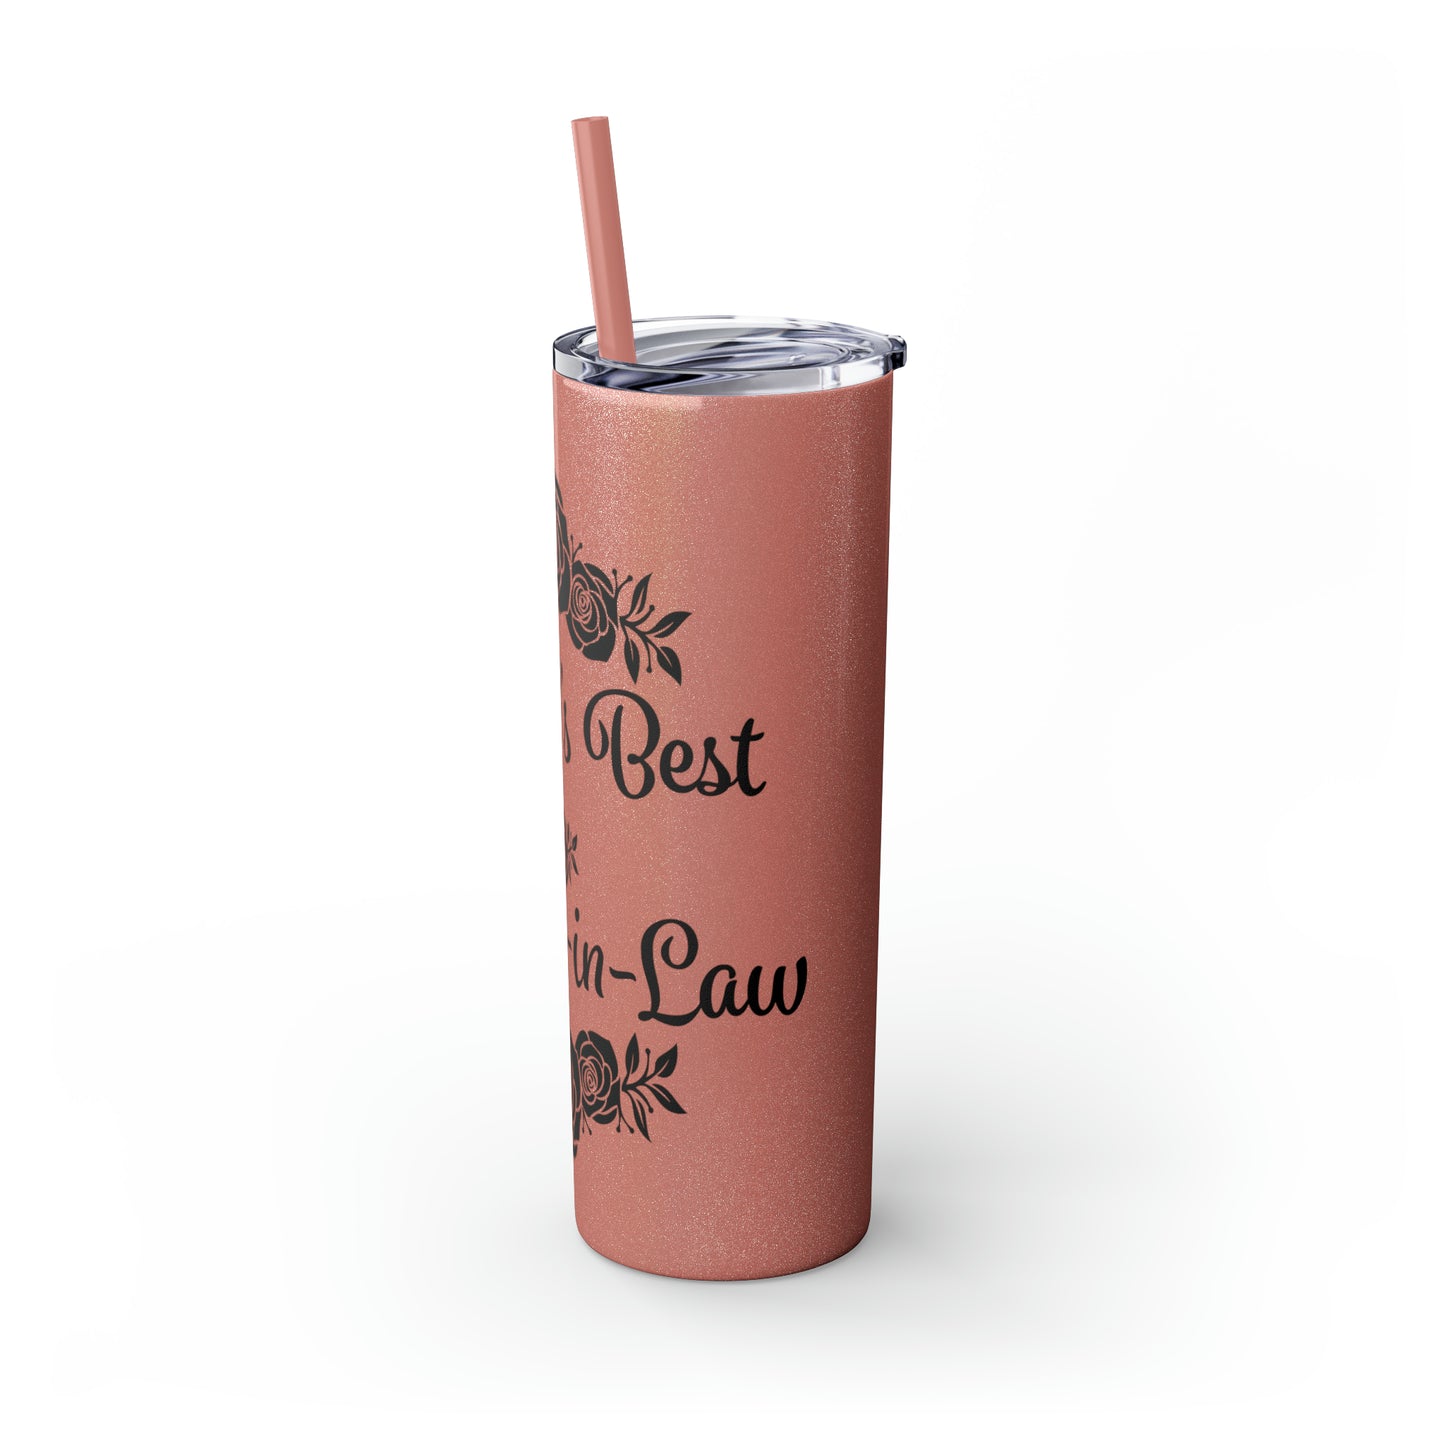 World's Best Mother-In-Law Skinny Tumbler with Straw, 20oz